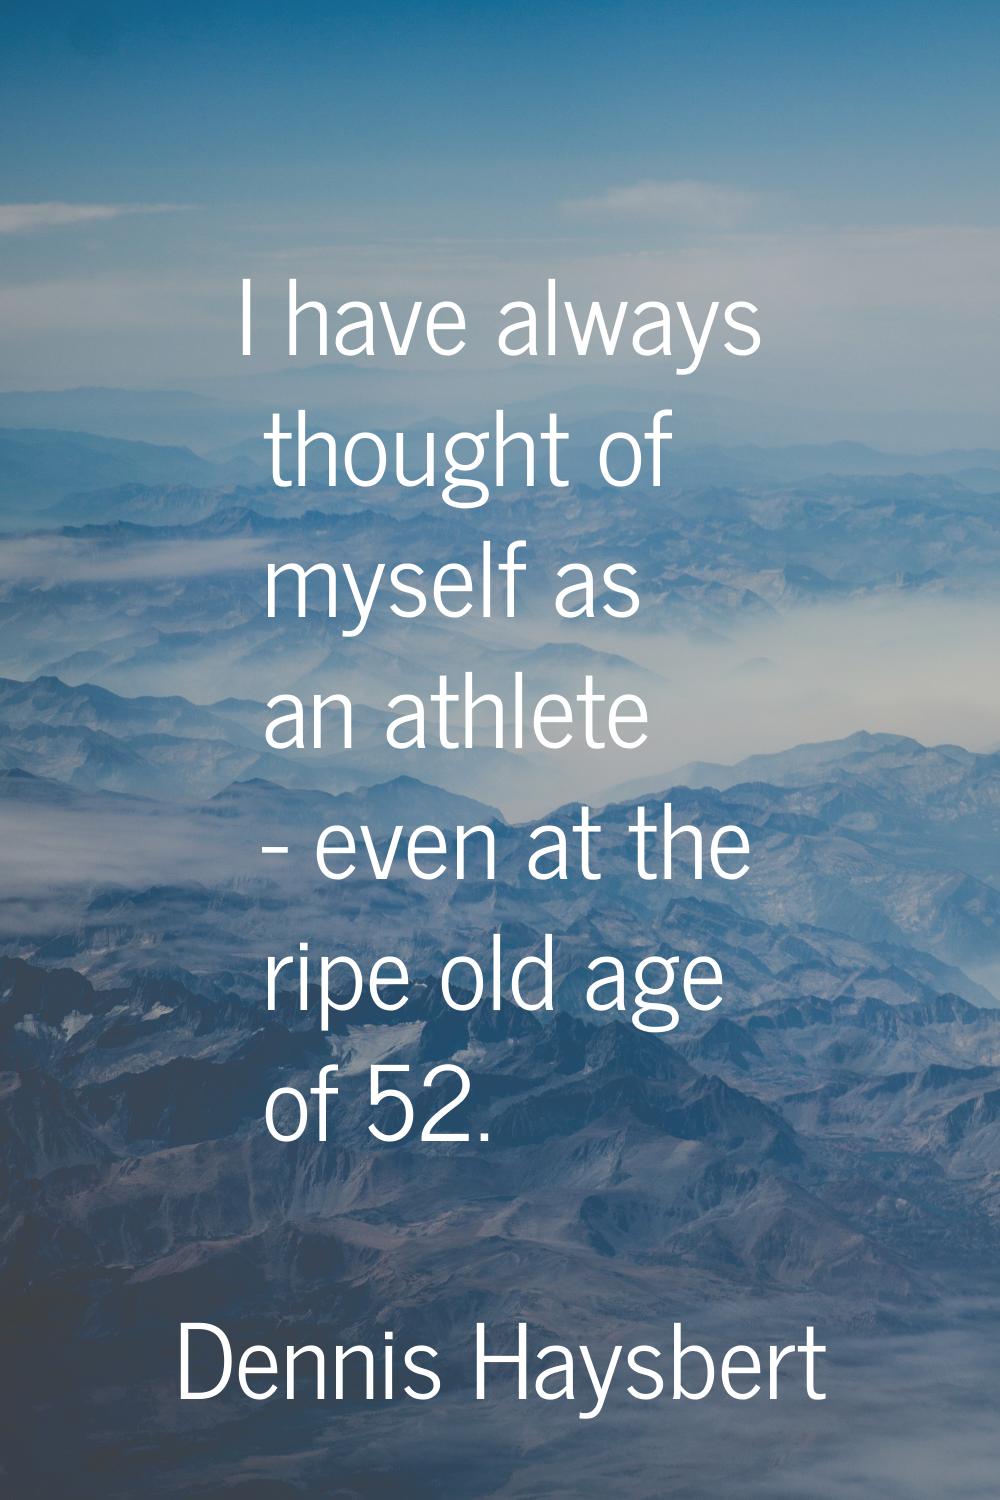 I have always thought of myself as an athlete - even at the ripe old age of 52.